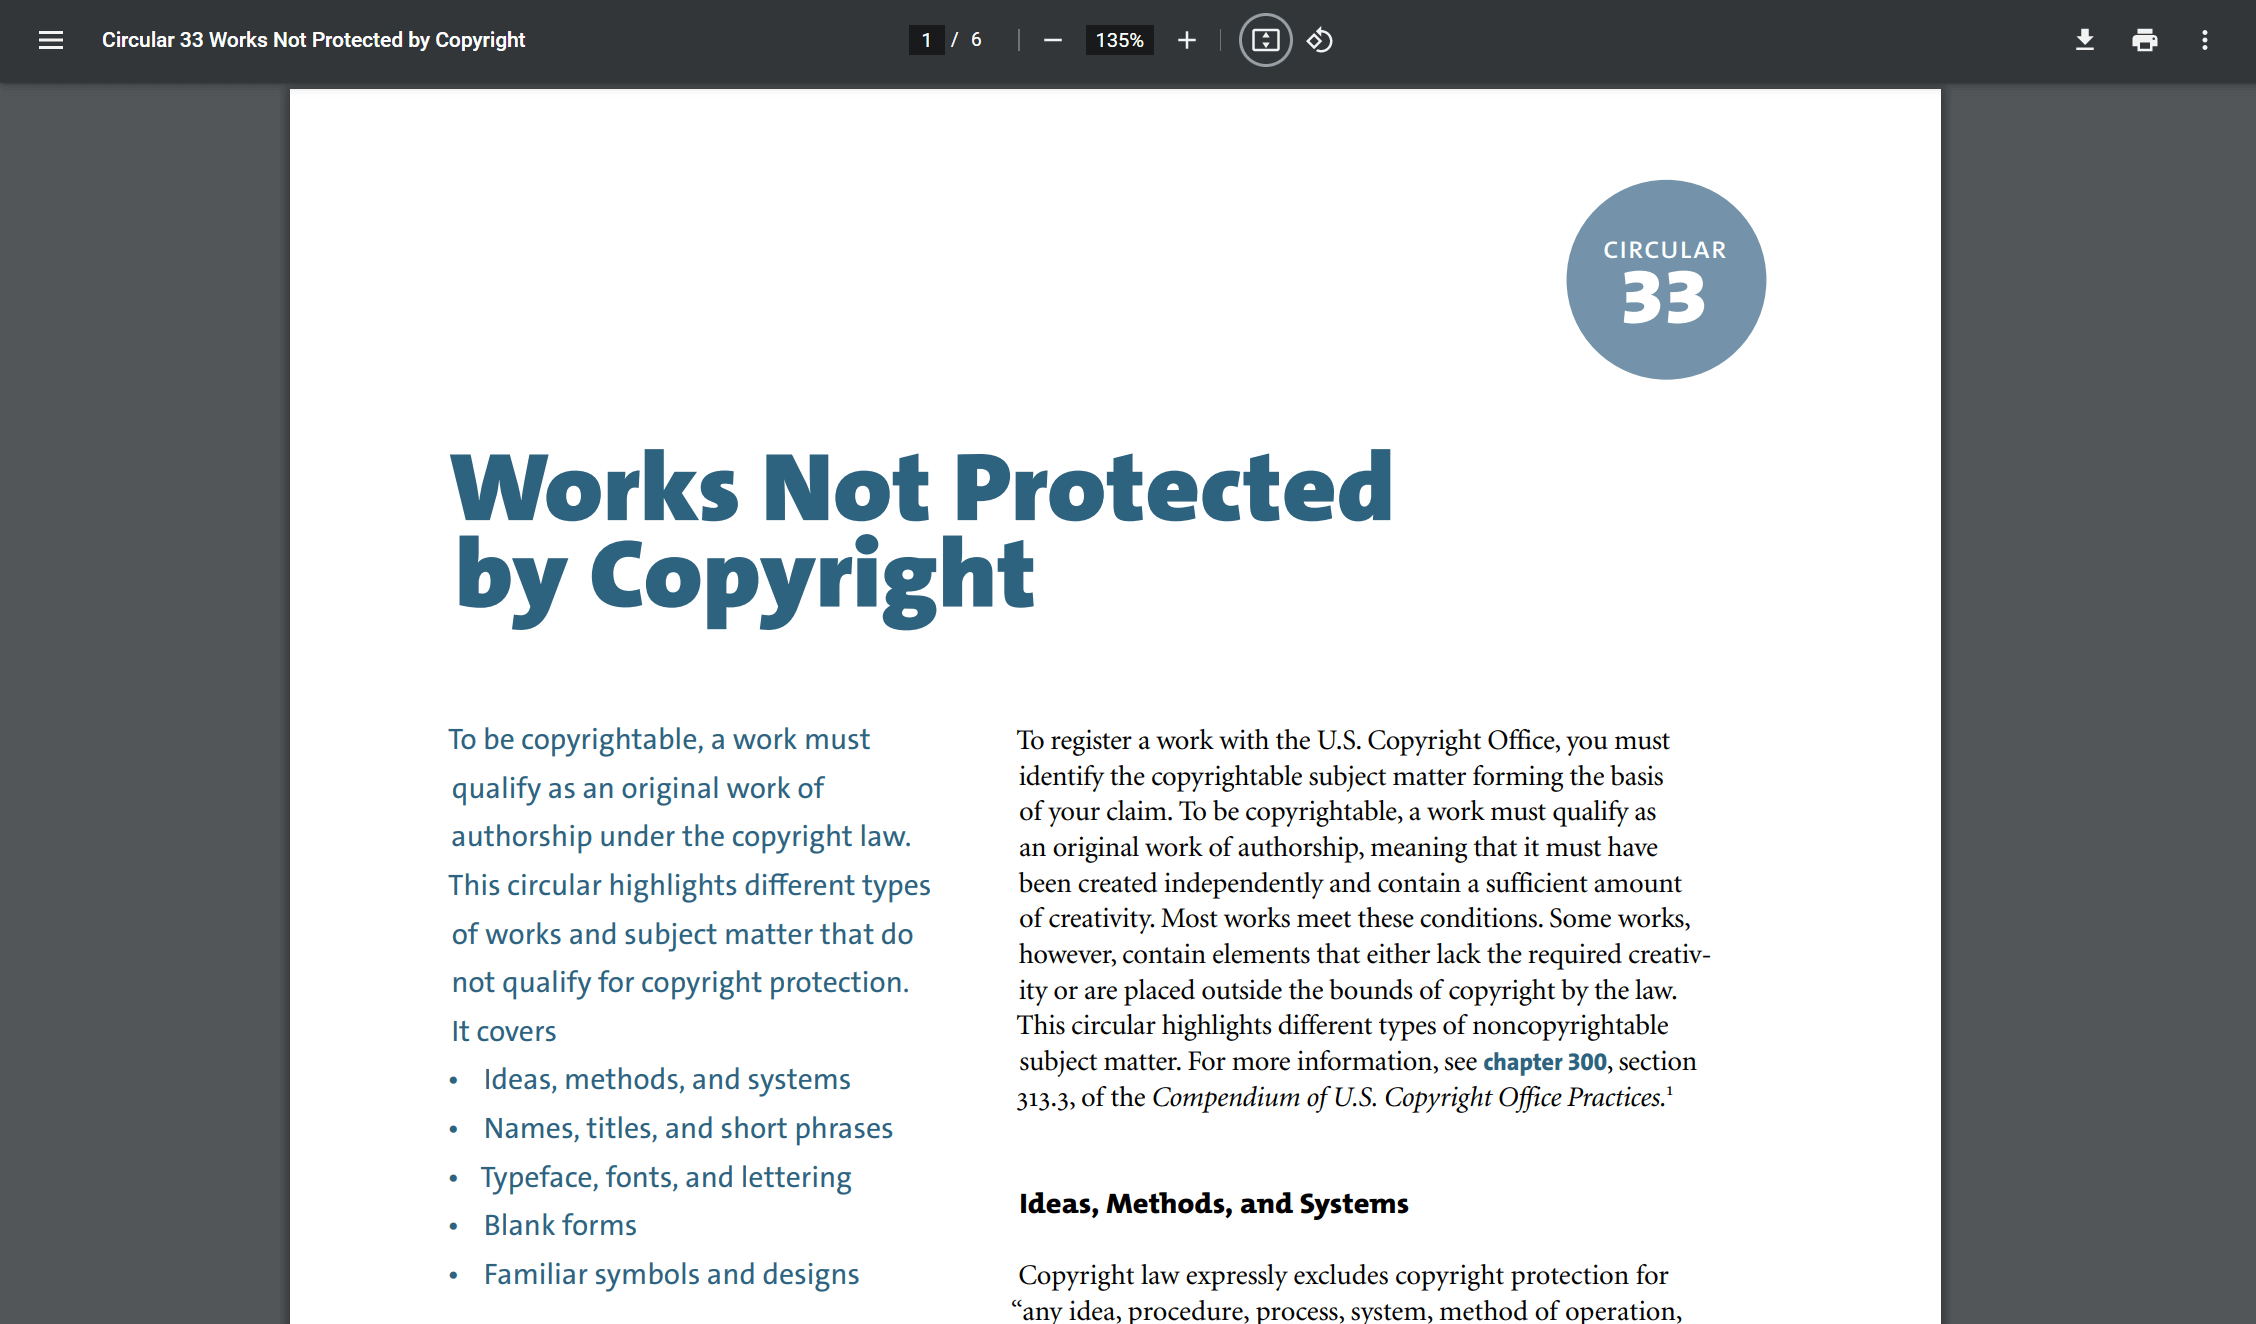 Circular 33 Works Not Protected by Copyright pdf